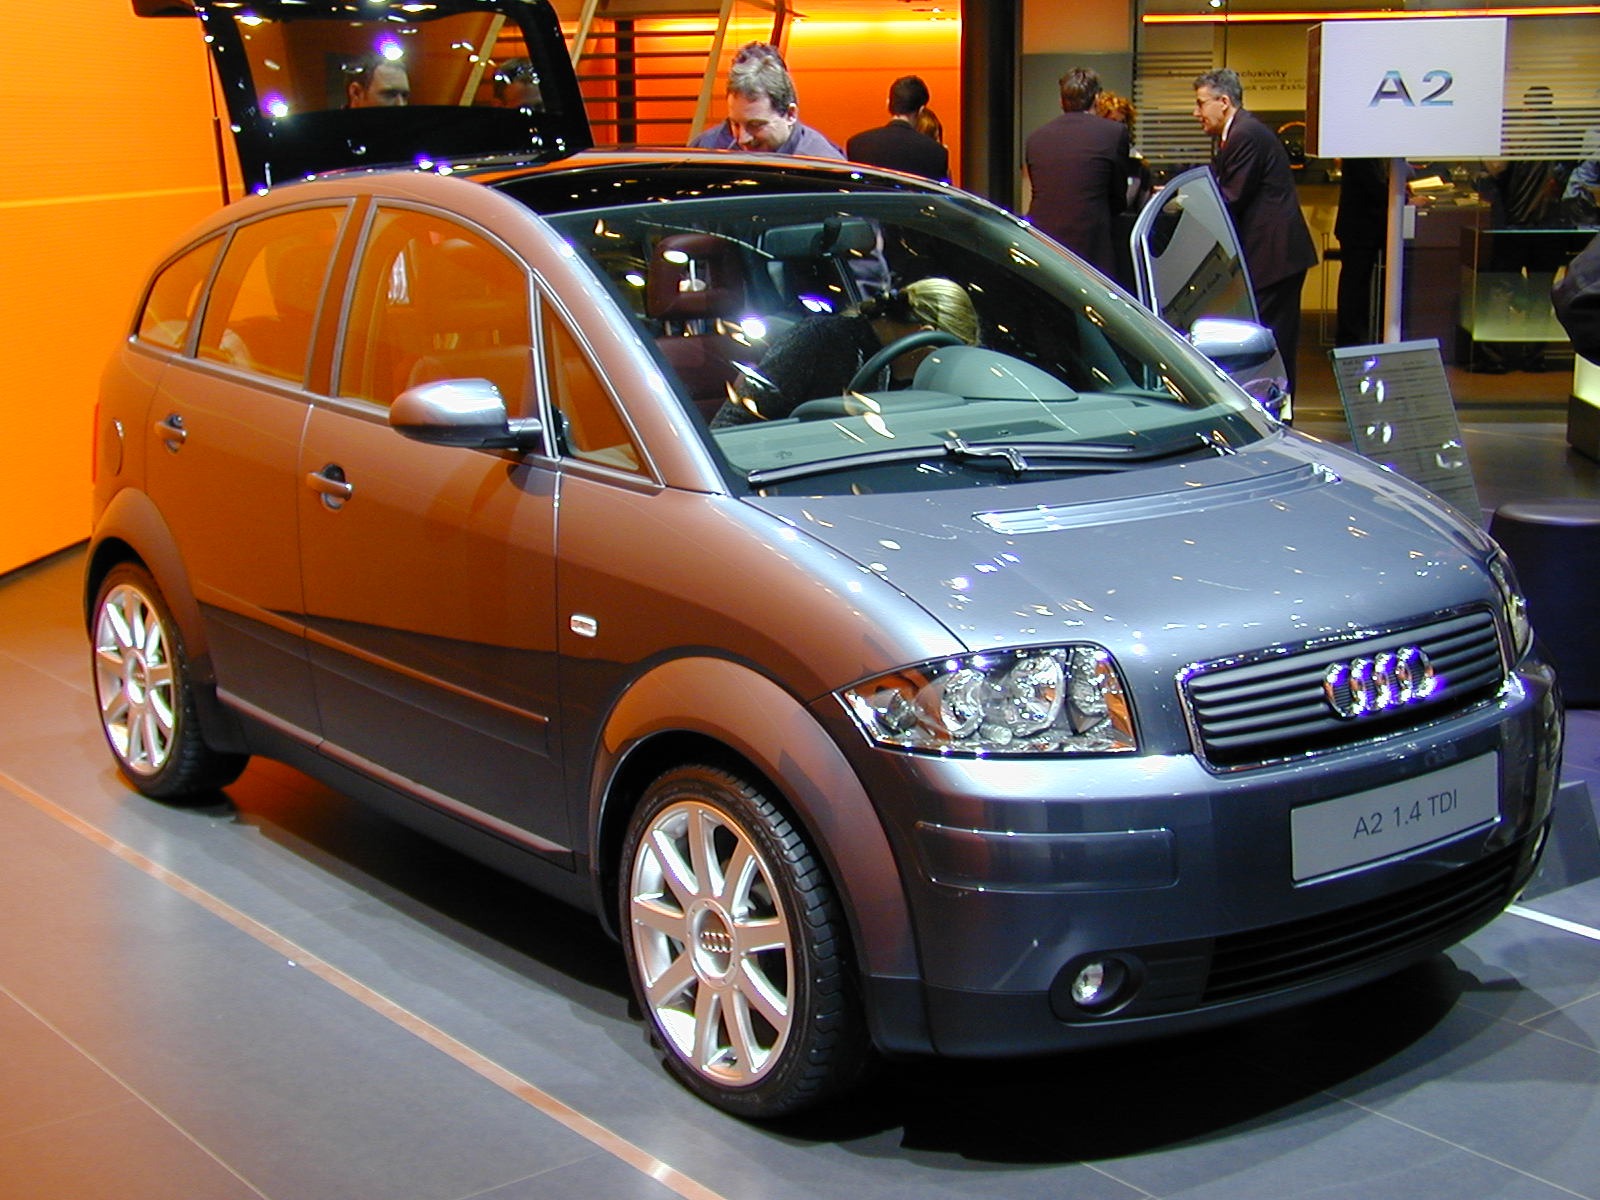 Audi a2 wallpapers